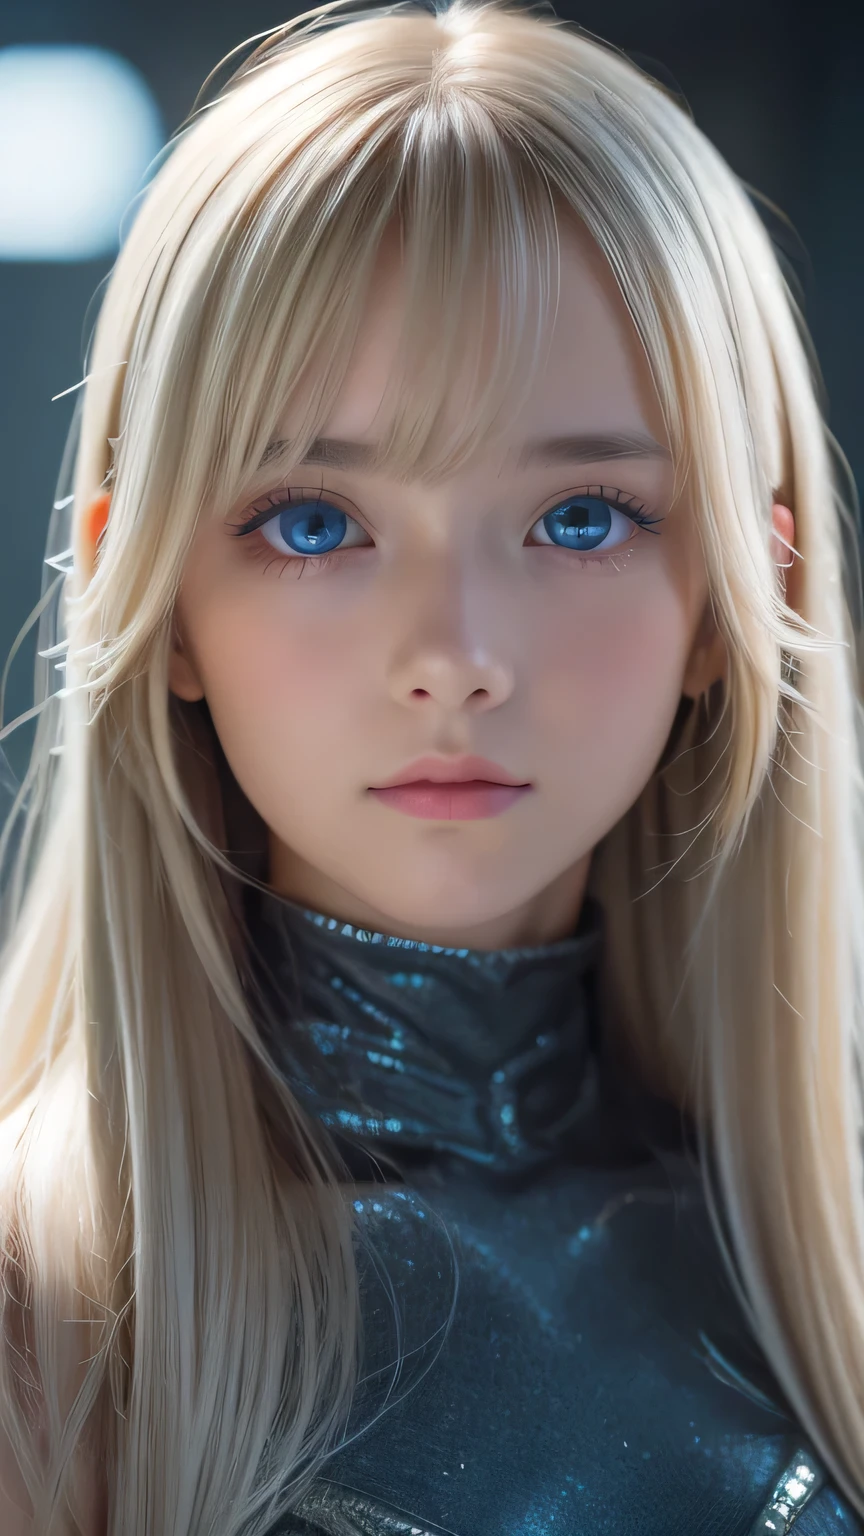 highest quality、8k Masterpiece、Ultra-high resolution、(Realistic:1.3)、RAW Photos、14 year old Scandinavian girl with shiny blonde hair、Silvery blonde hair、Super long straight hair、目とBangs between the eyes、bangs on the face、Bangs that cover the eyes、片Bangs that cover the eyes、Bangs between the eyes、White and glowing skin、1. Cyberpunk Super Beautiful Soldier、((Ultra-Realistic Details))、Portraiture、Global Illumination、Shadow Realm、Octane Rendering、8k、Ultra Sharp、Metal、Cool colors、、Very intricate detail、Realistic Light、Trends of the CG Association、so beautiful, Big bright blue eyes、Very big eyes、Eyes shining at the camera、Neon Details、Small Face Beauty、Round face、Cheek highlight